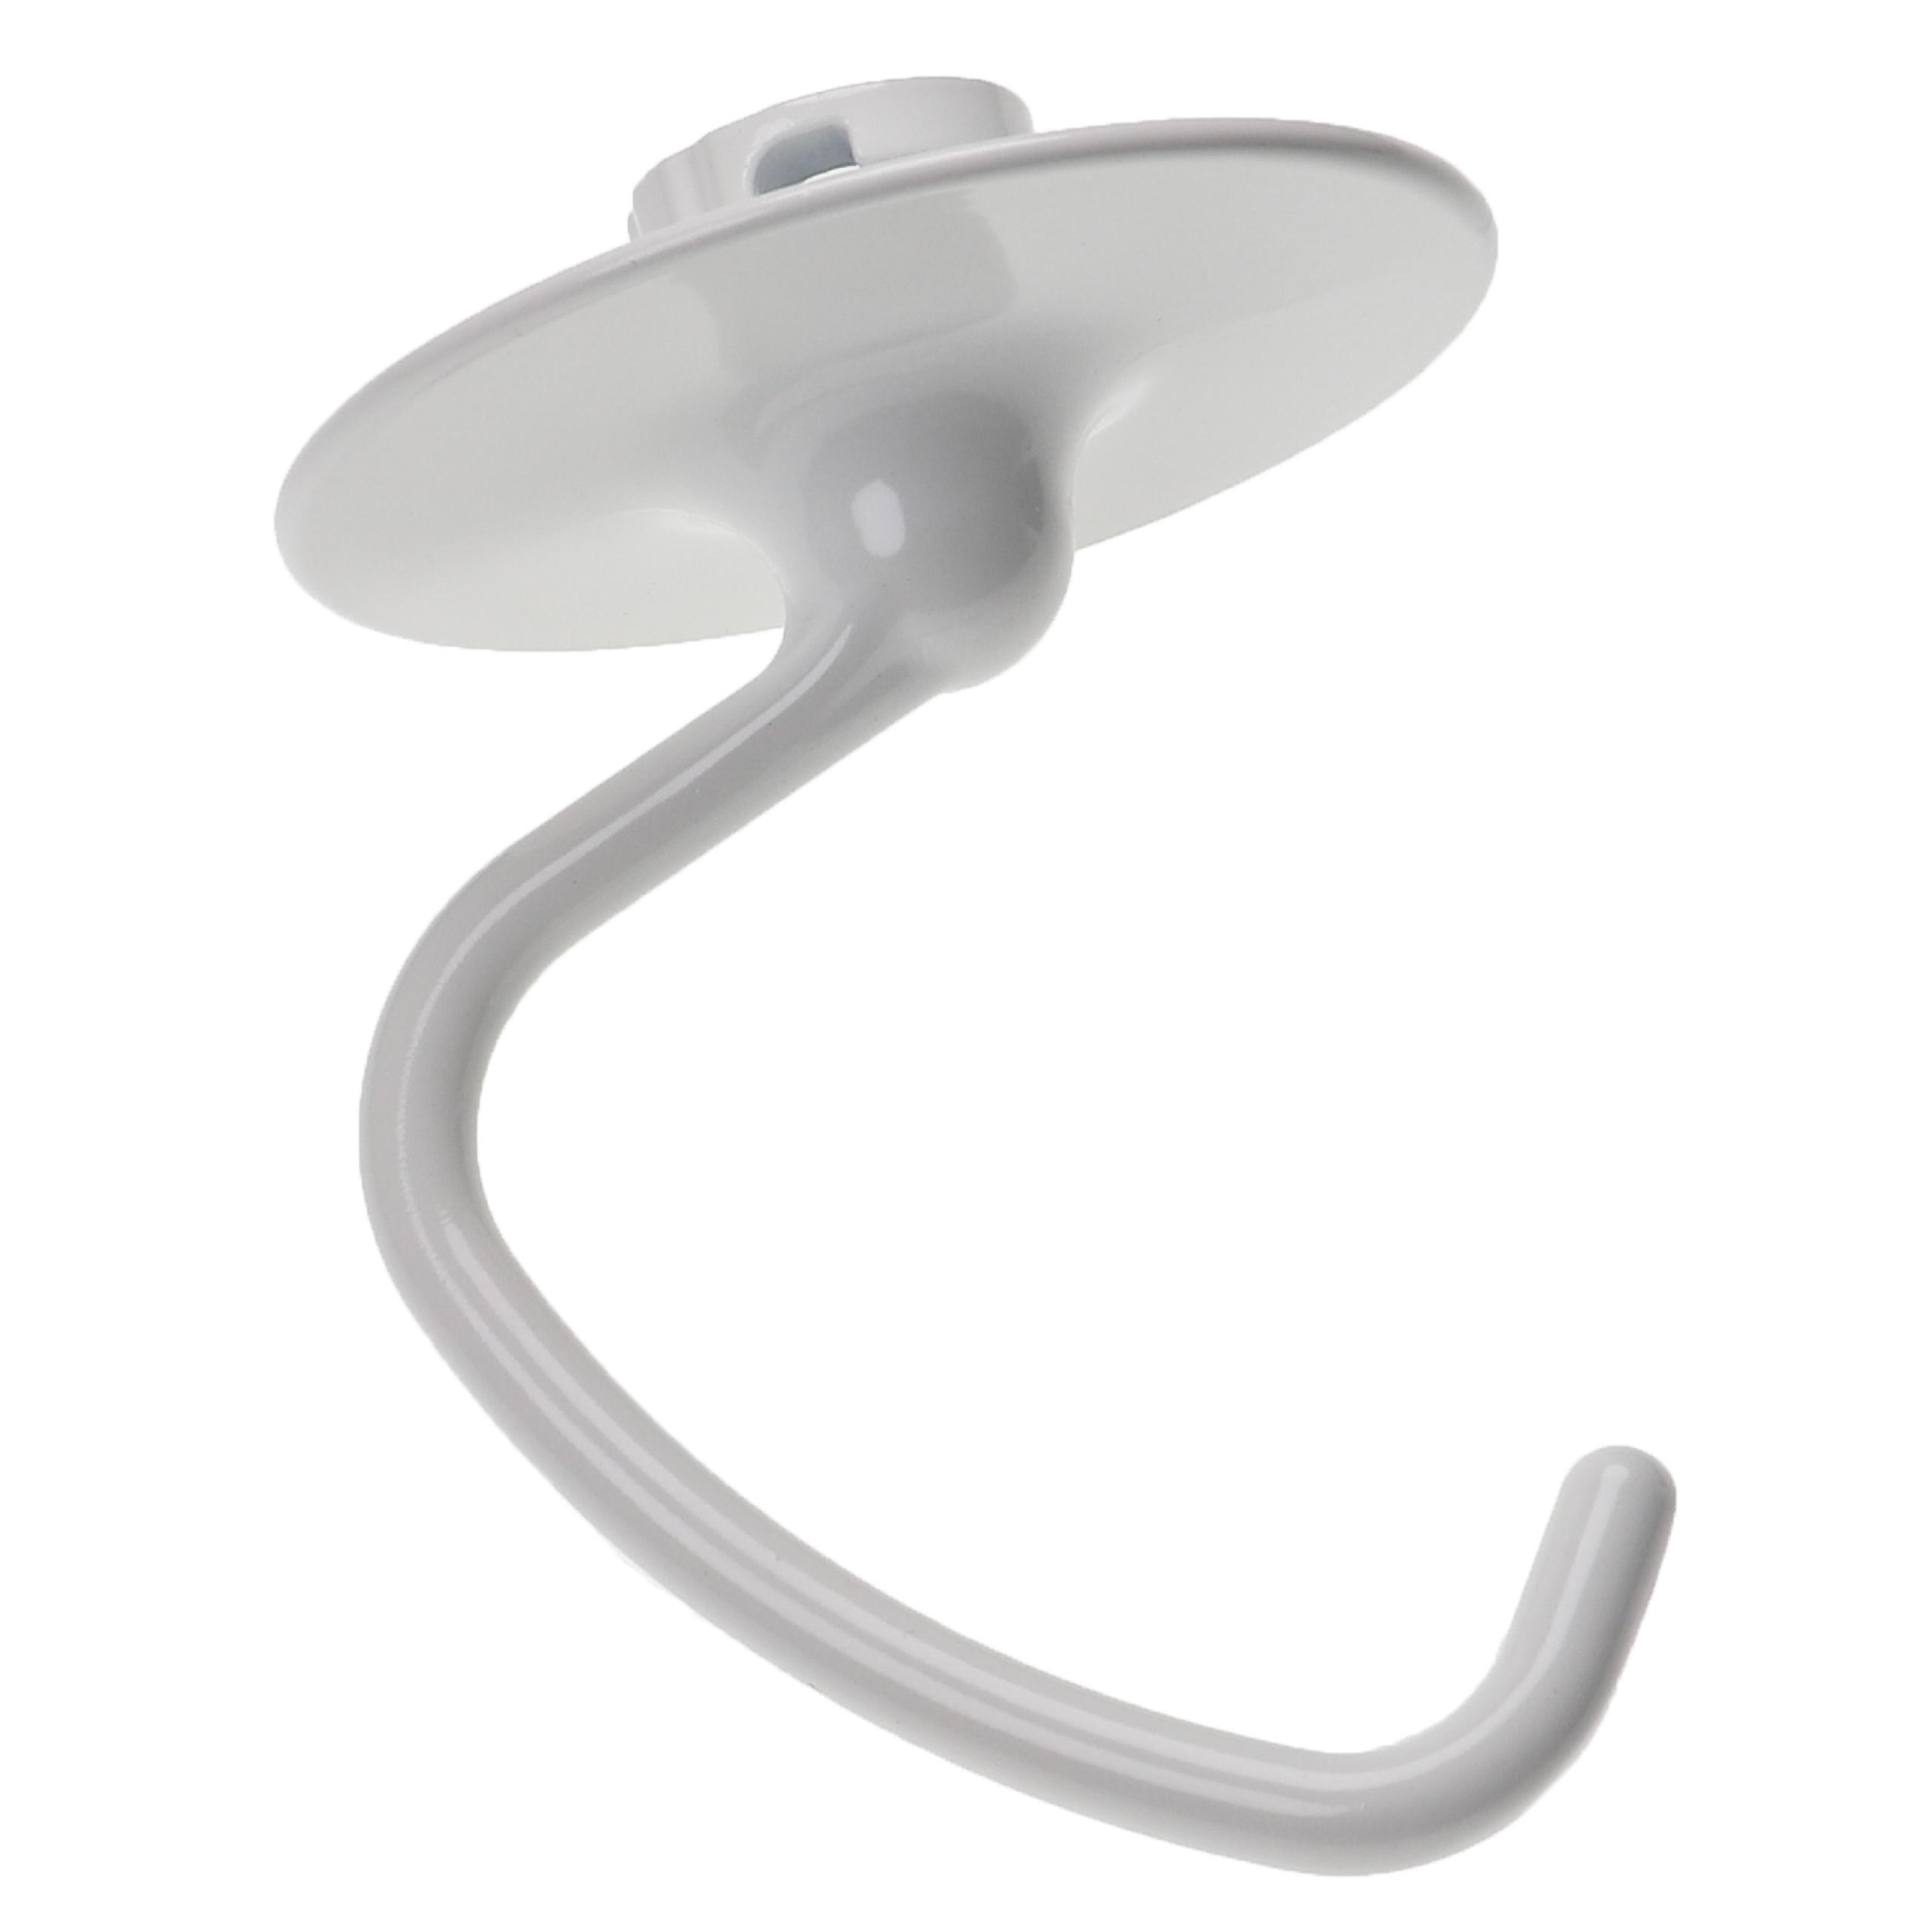 Dough Hook Replacement for Indesit-Company C00510811 for Kitchen Machine - Mixing Paddle, white